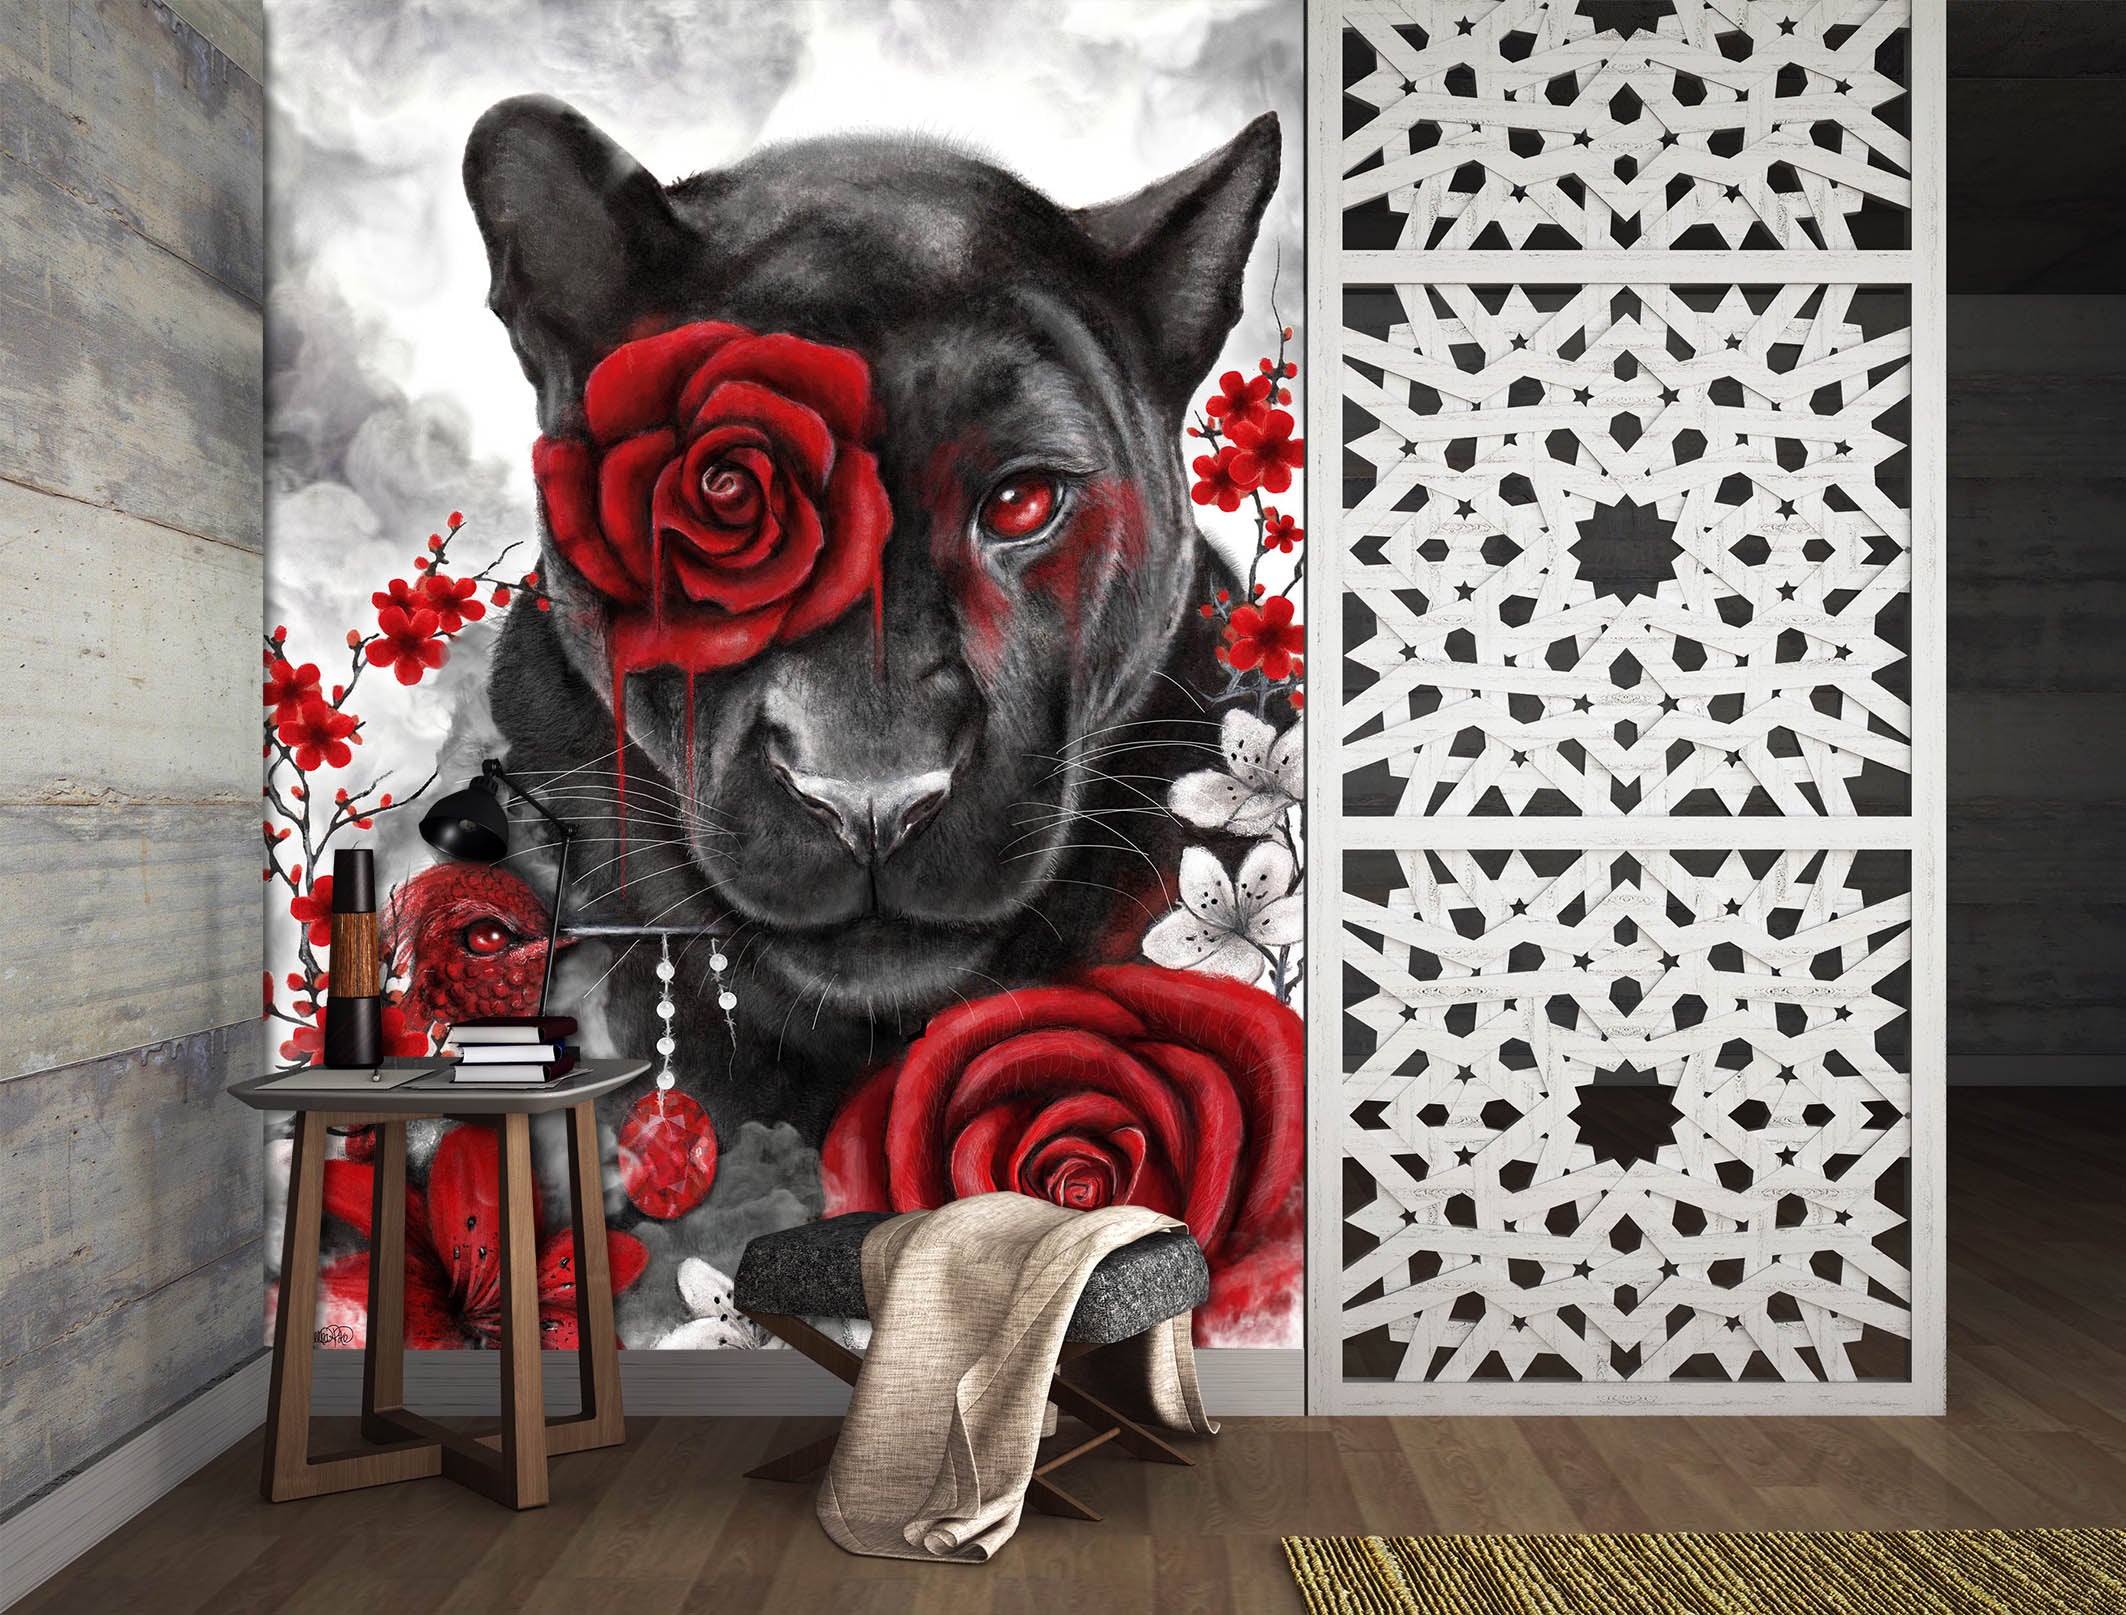 3D Red Rose Panther 8463 Sheena Pike Wall Mural Wall Murals